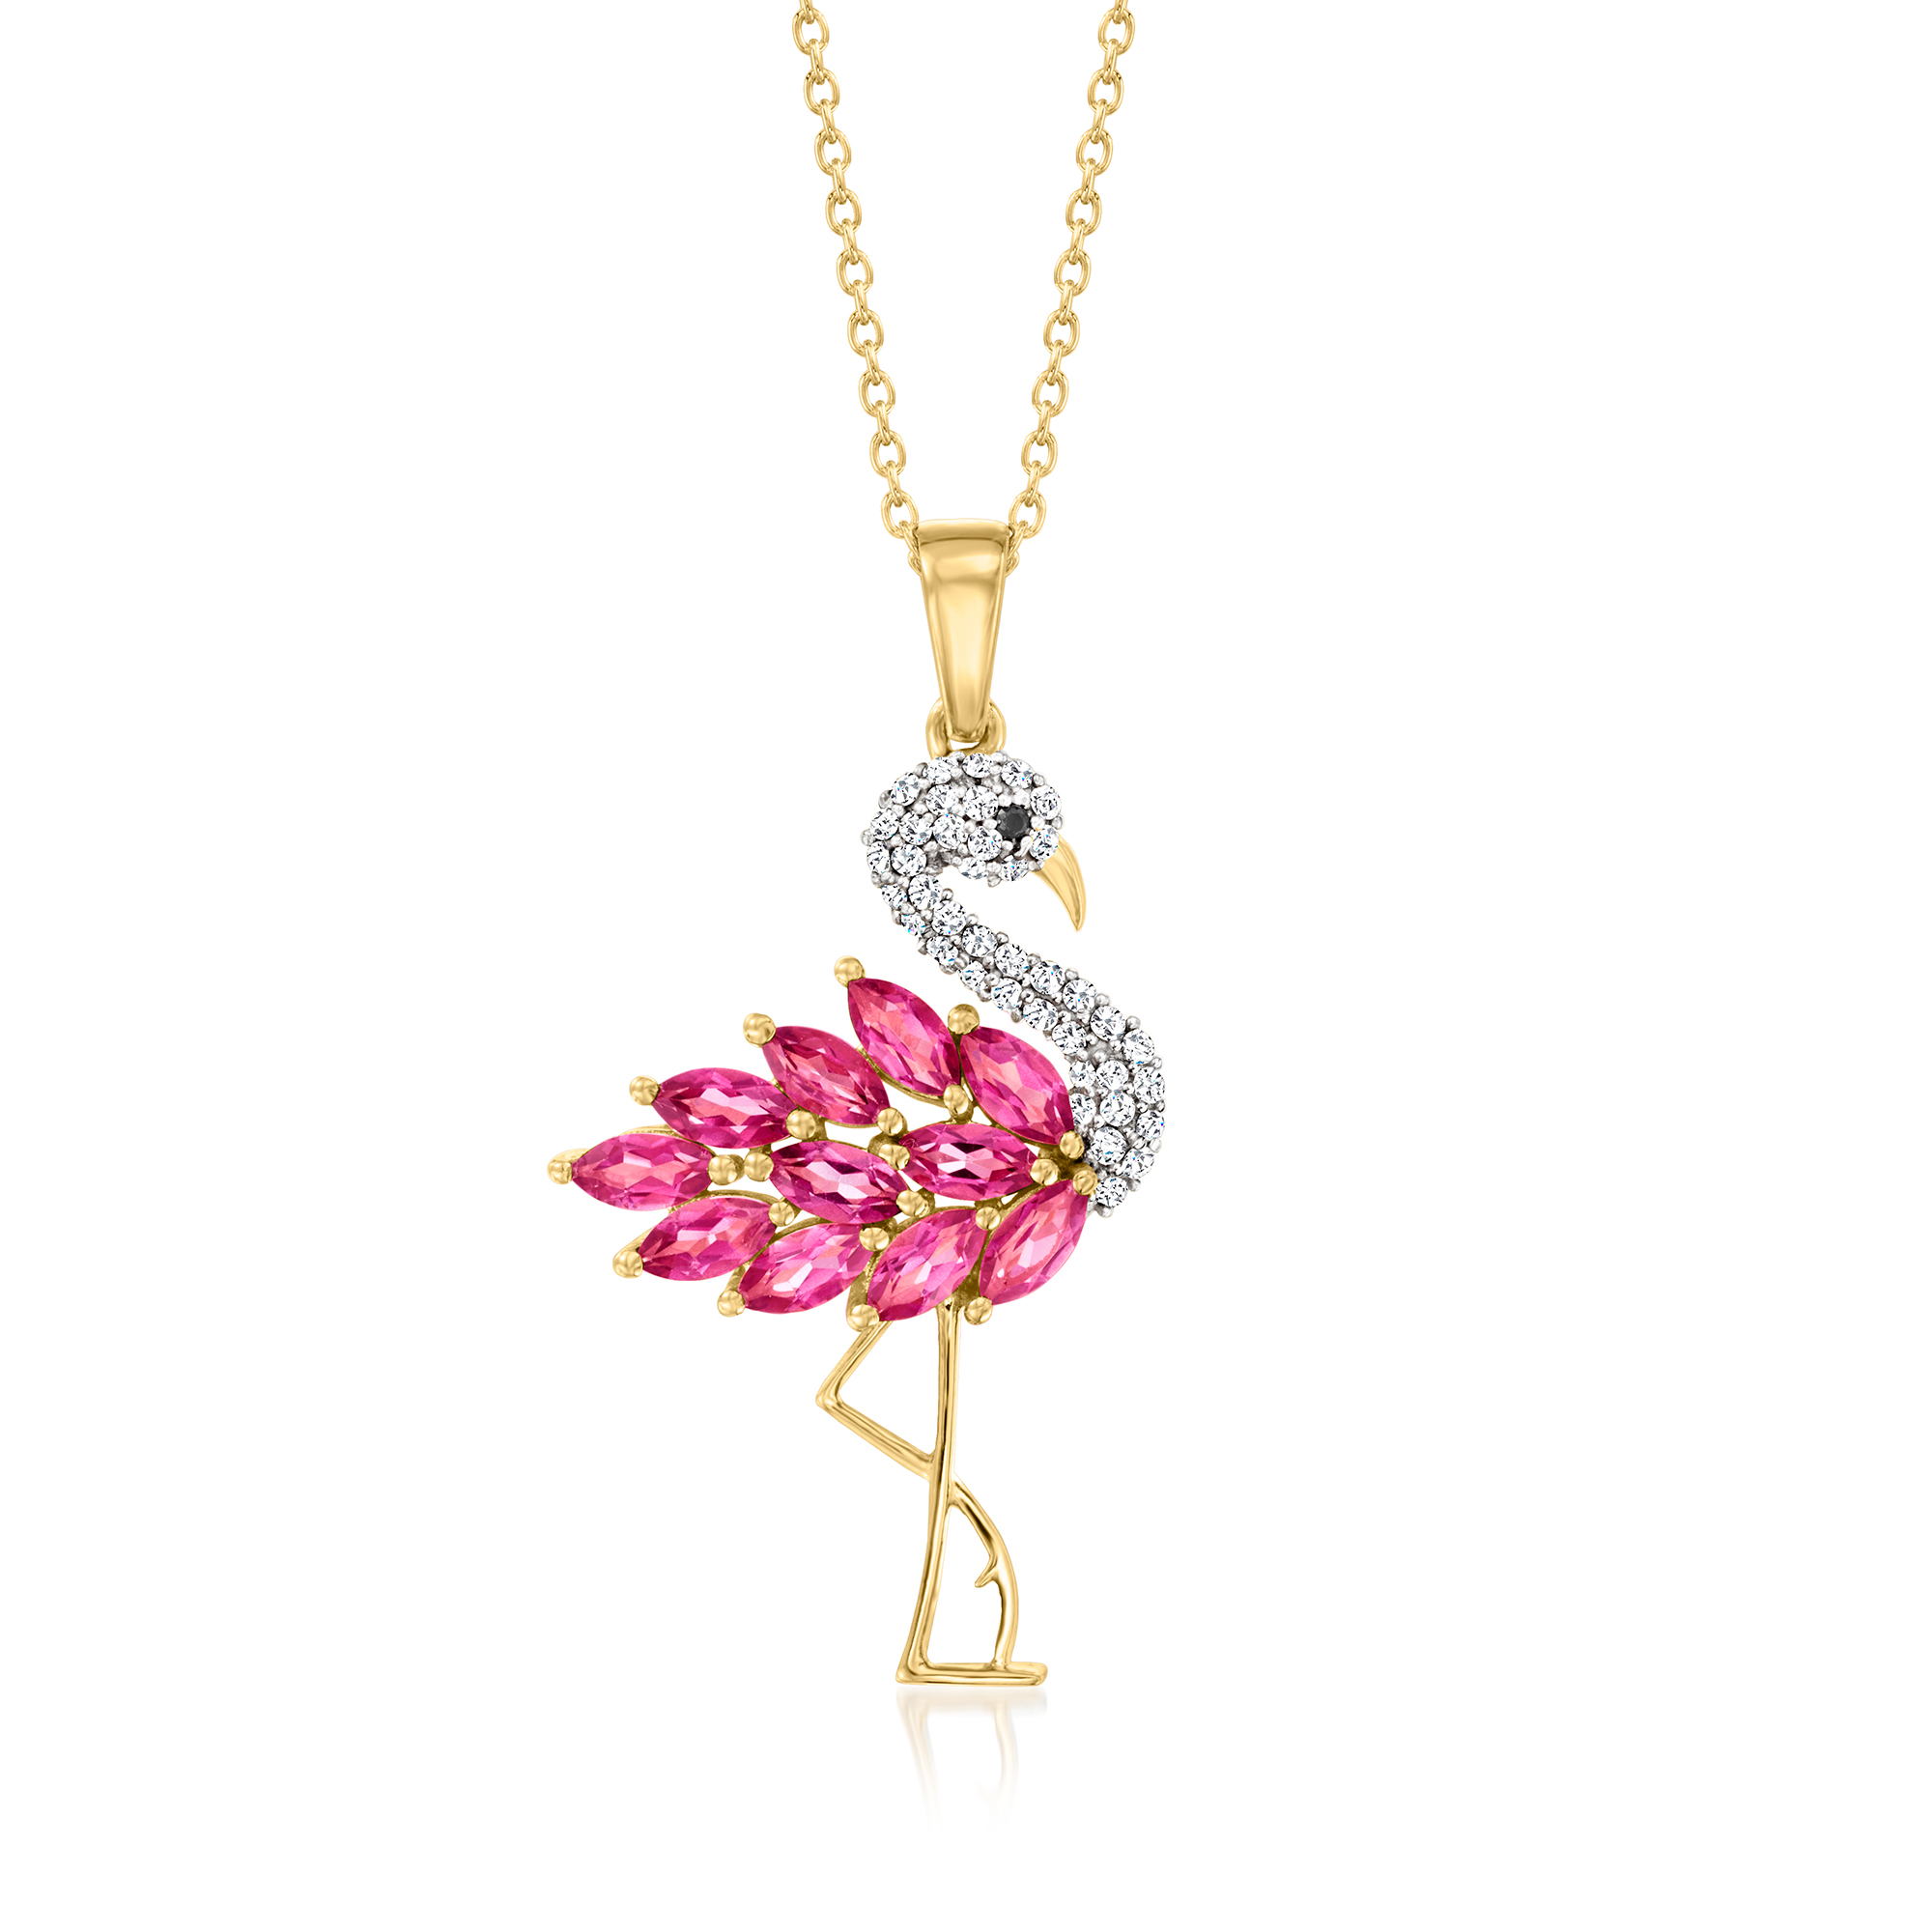 Buy Animal Jewelry, 925k Silver Gold Flamingo Necklace, Bridesmaid Gift,  Birthday Gift, Minimalist Flamingo Necklace Summer Jewelry, Weddinggift  Online in India - Etsy